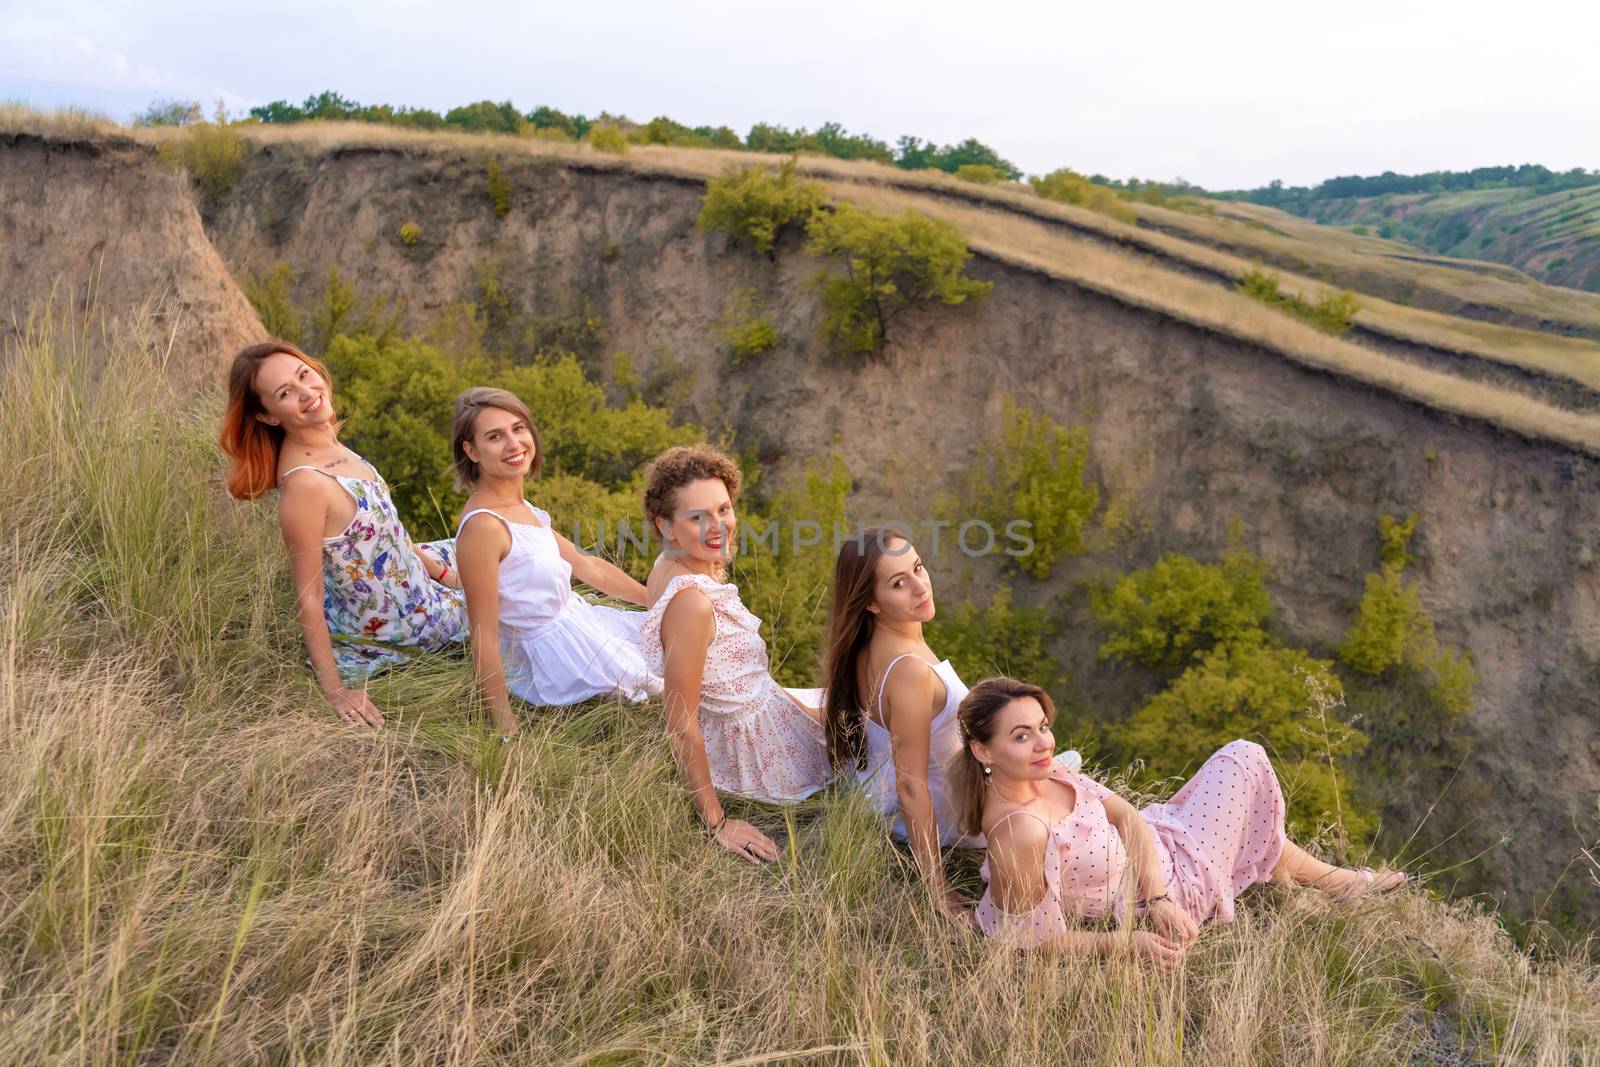 A cheerful company of beautiful girls friends enjoy a picturesque panorama of the green hills at sunset by Try_my_best